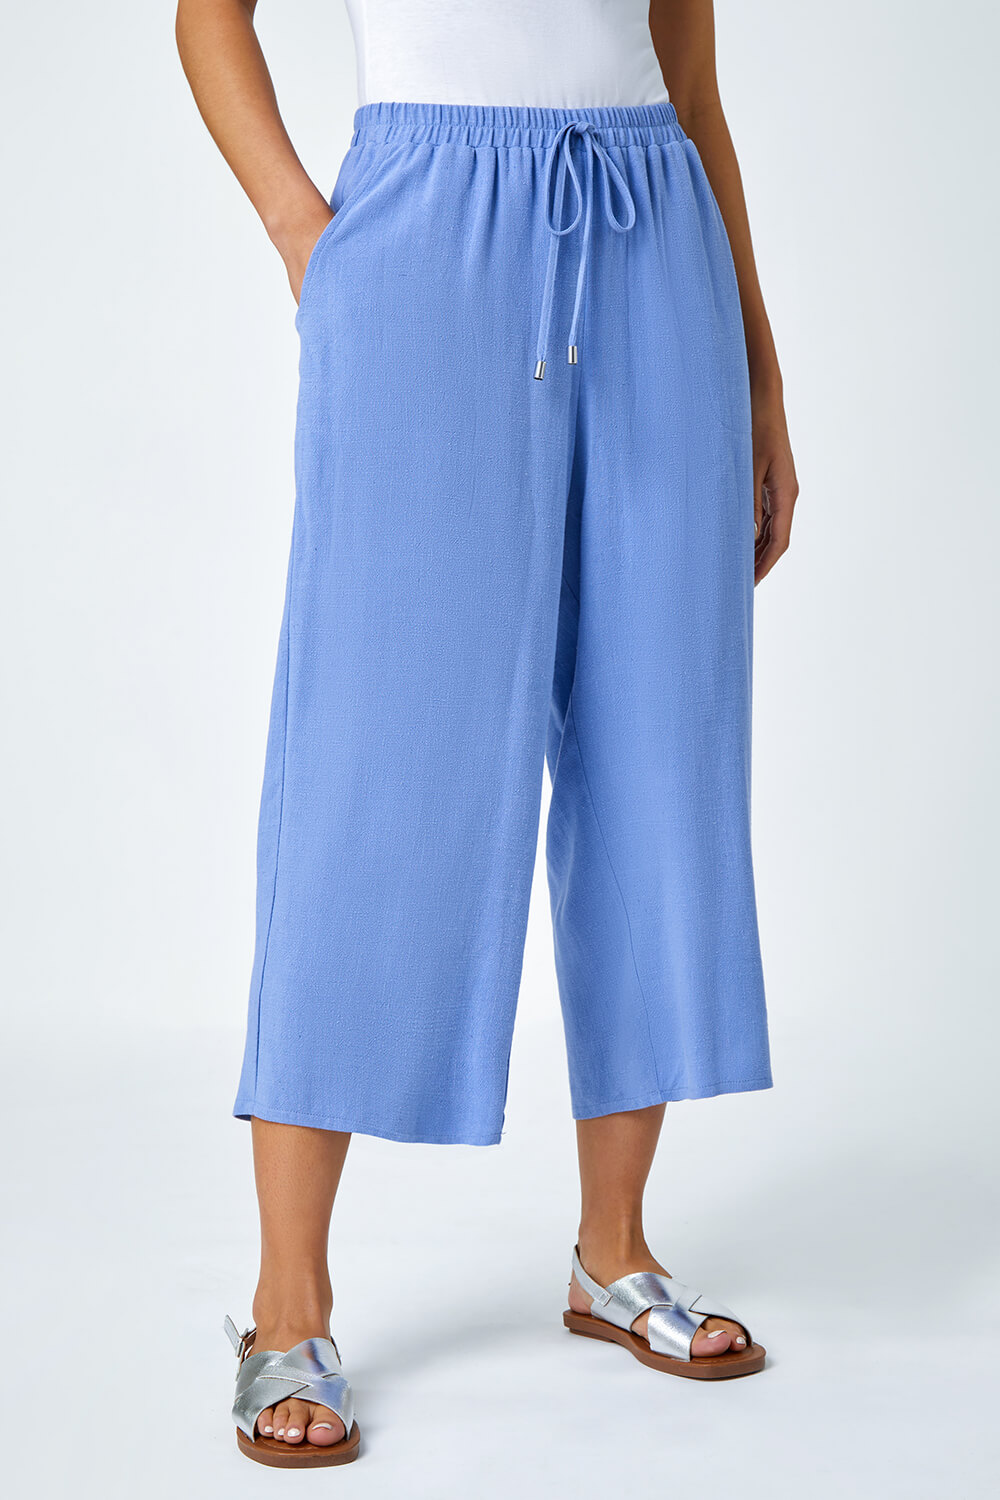 Blue Petite Linen Mix Wide Cropped Trousers, Image 4 of 5